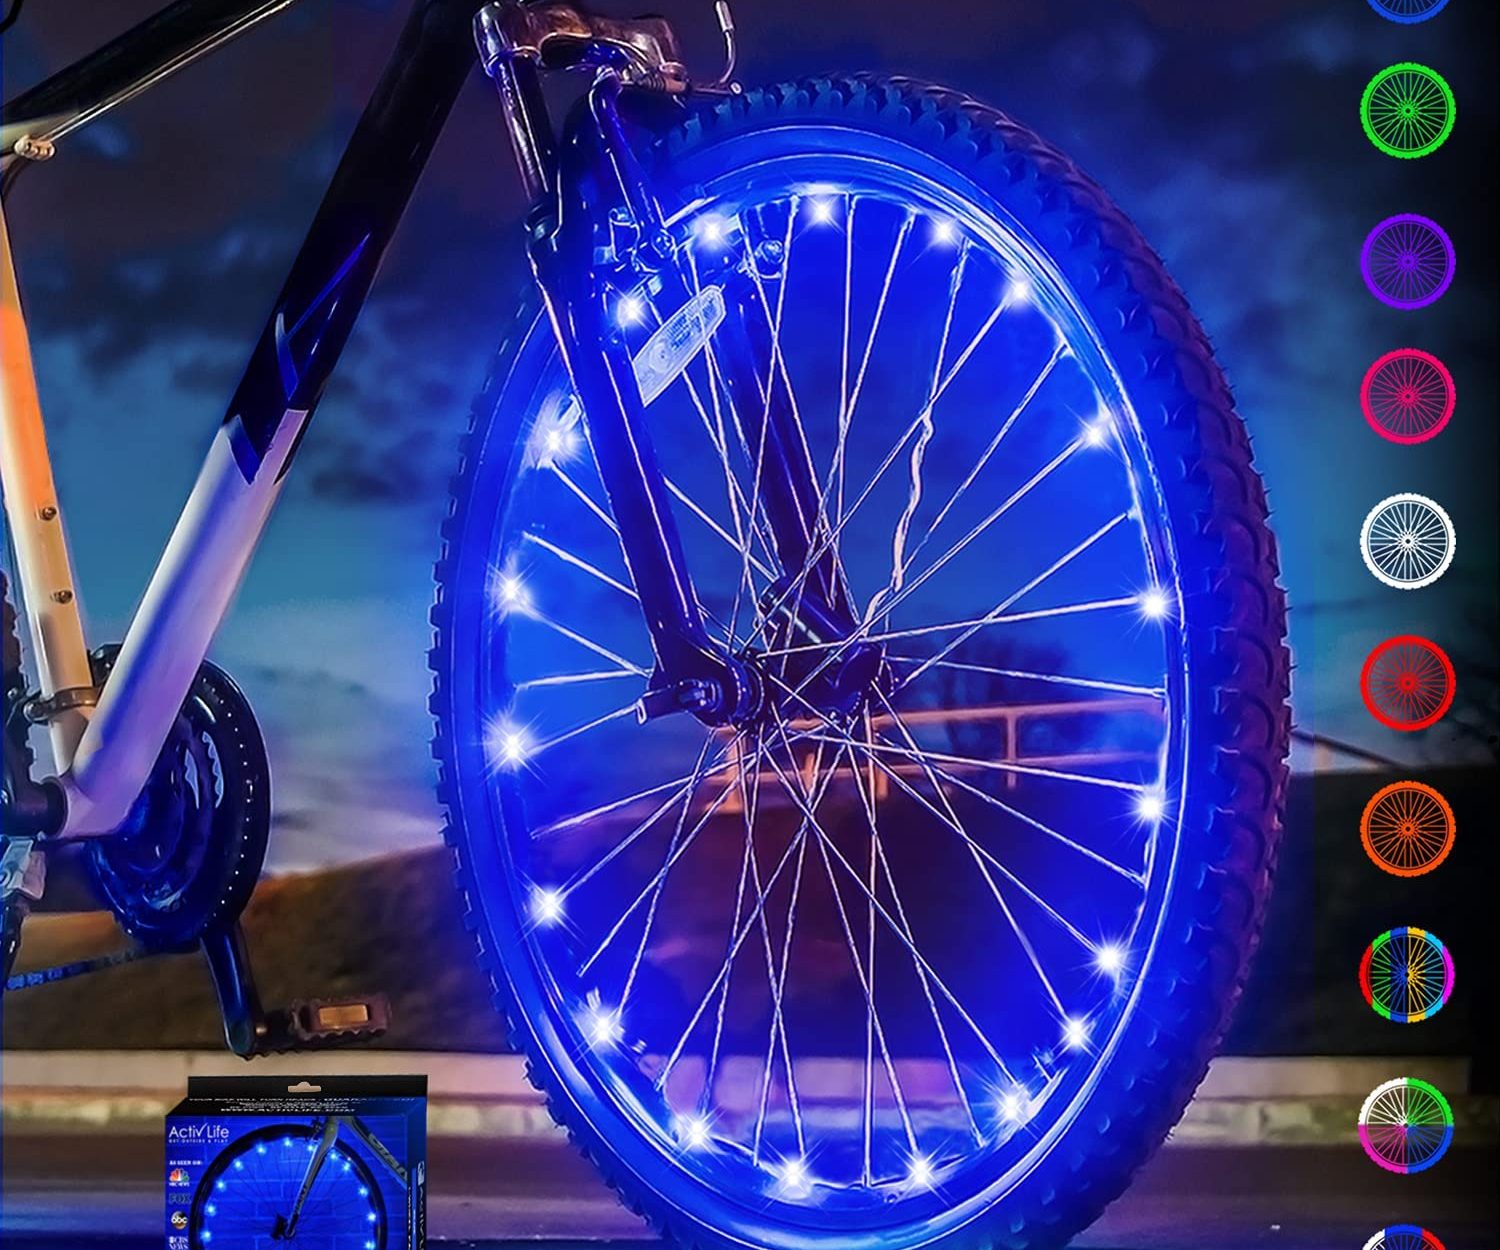 LED Bike Wheel Lights with Batteries Included